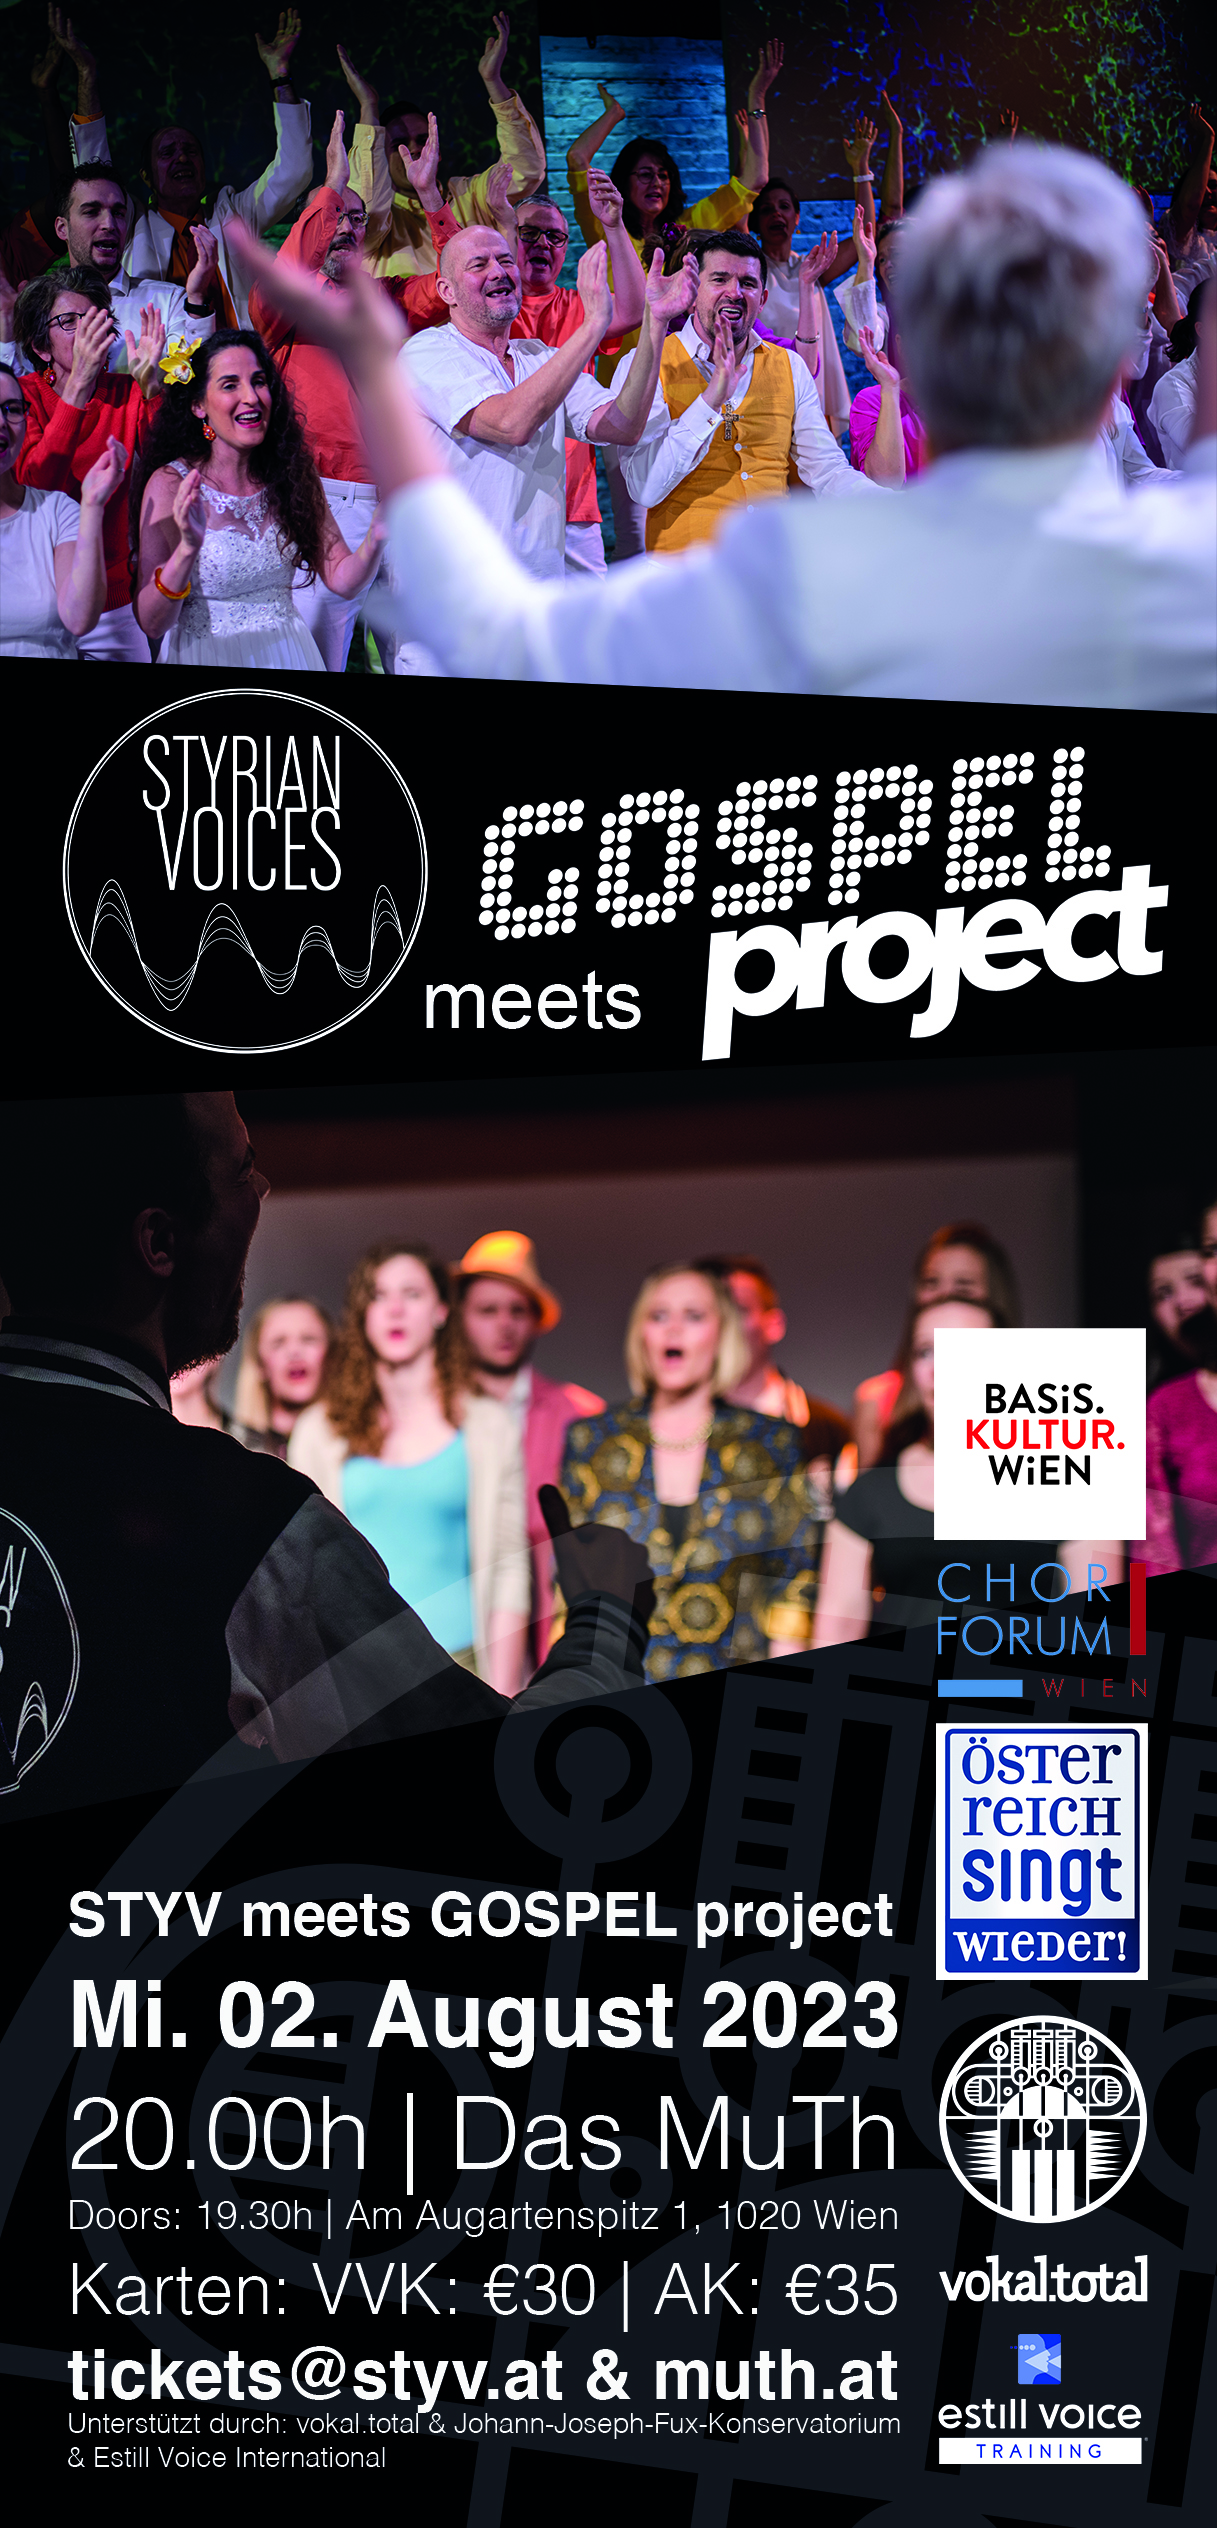 Styrian Voices meets Gospel project